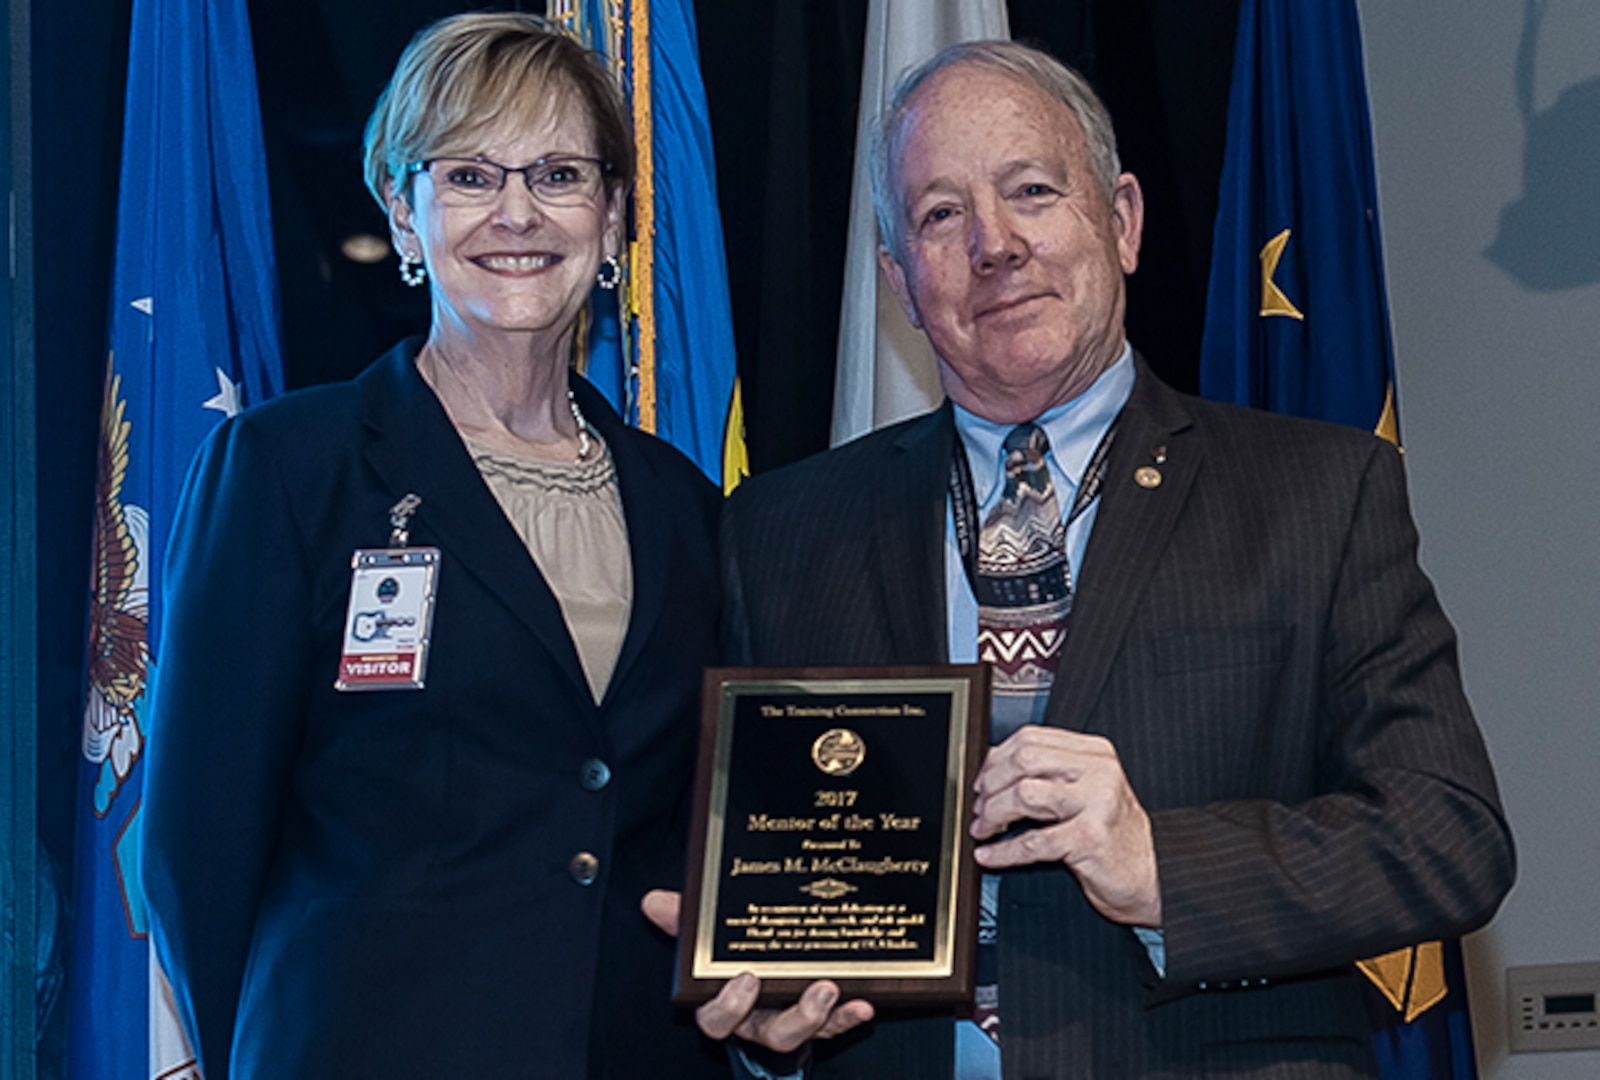 Kathy Drahosz, president of The Training Connection, Inc., presented DLA Land and Maritime Deputy Director James McClaugherty with their Mentor of the Year Award.  